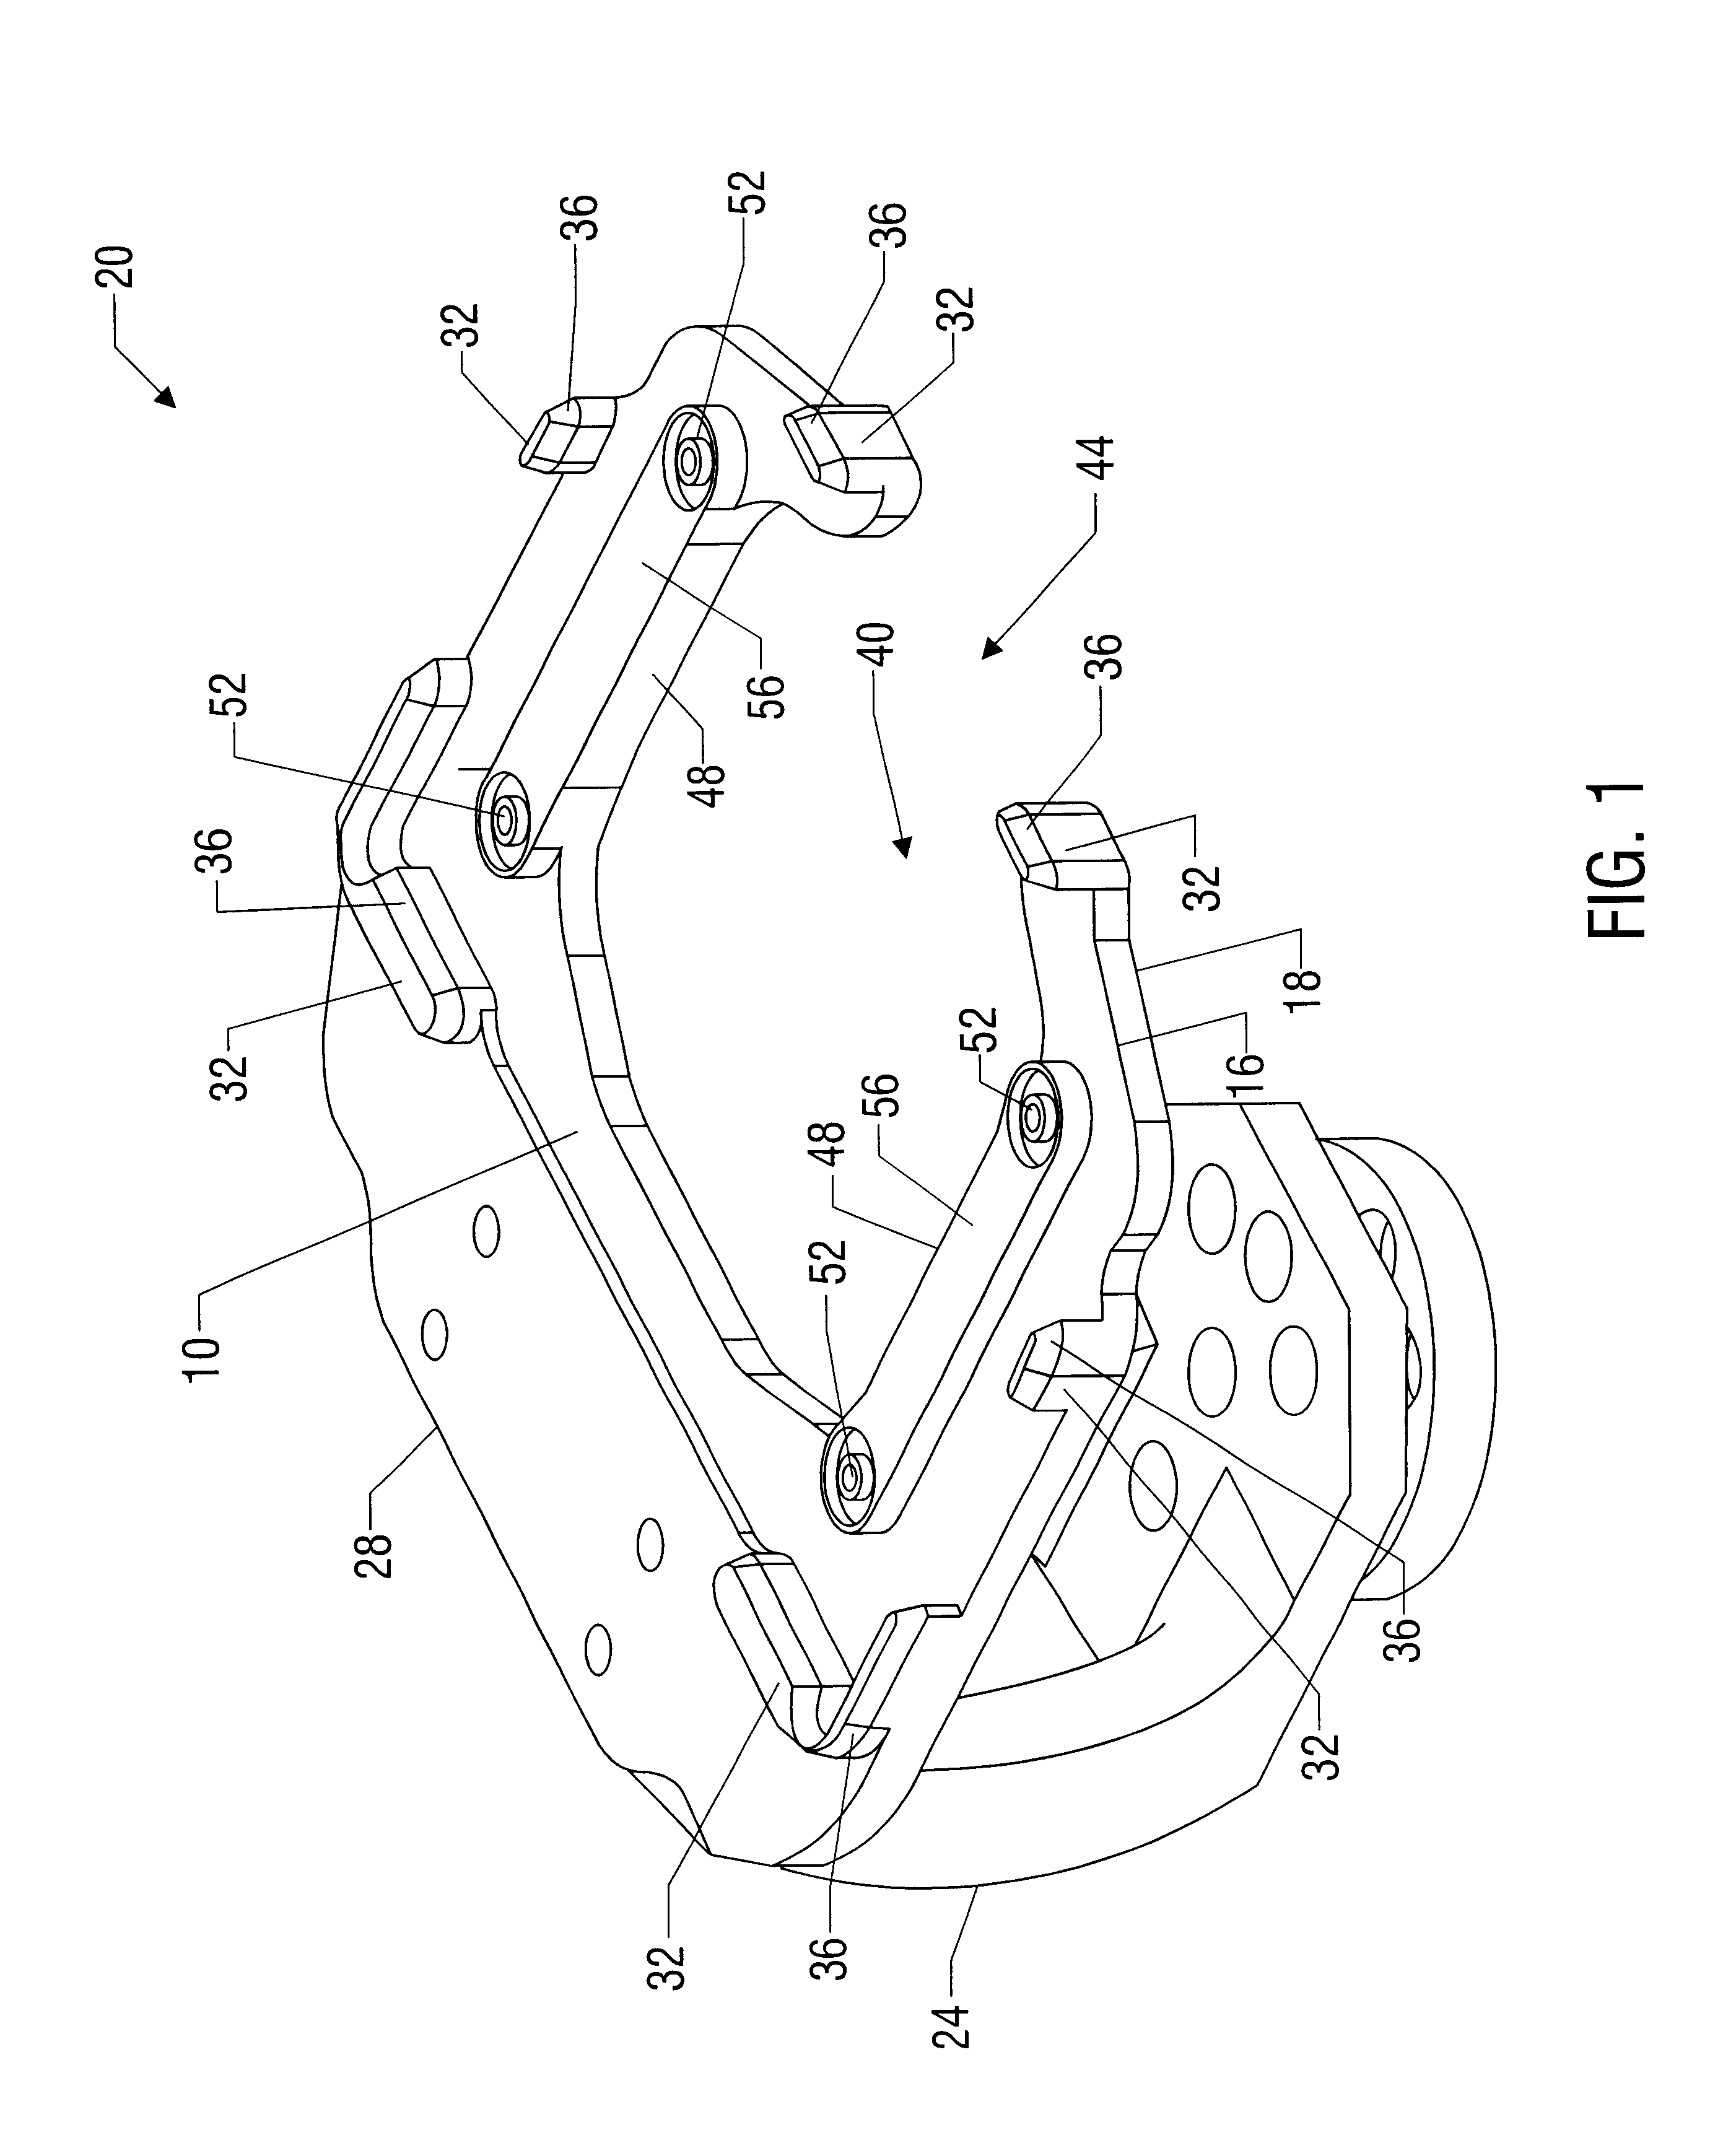 Method and apparatus for shuttling microtitre plates